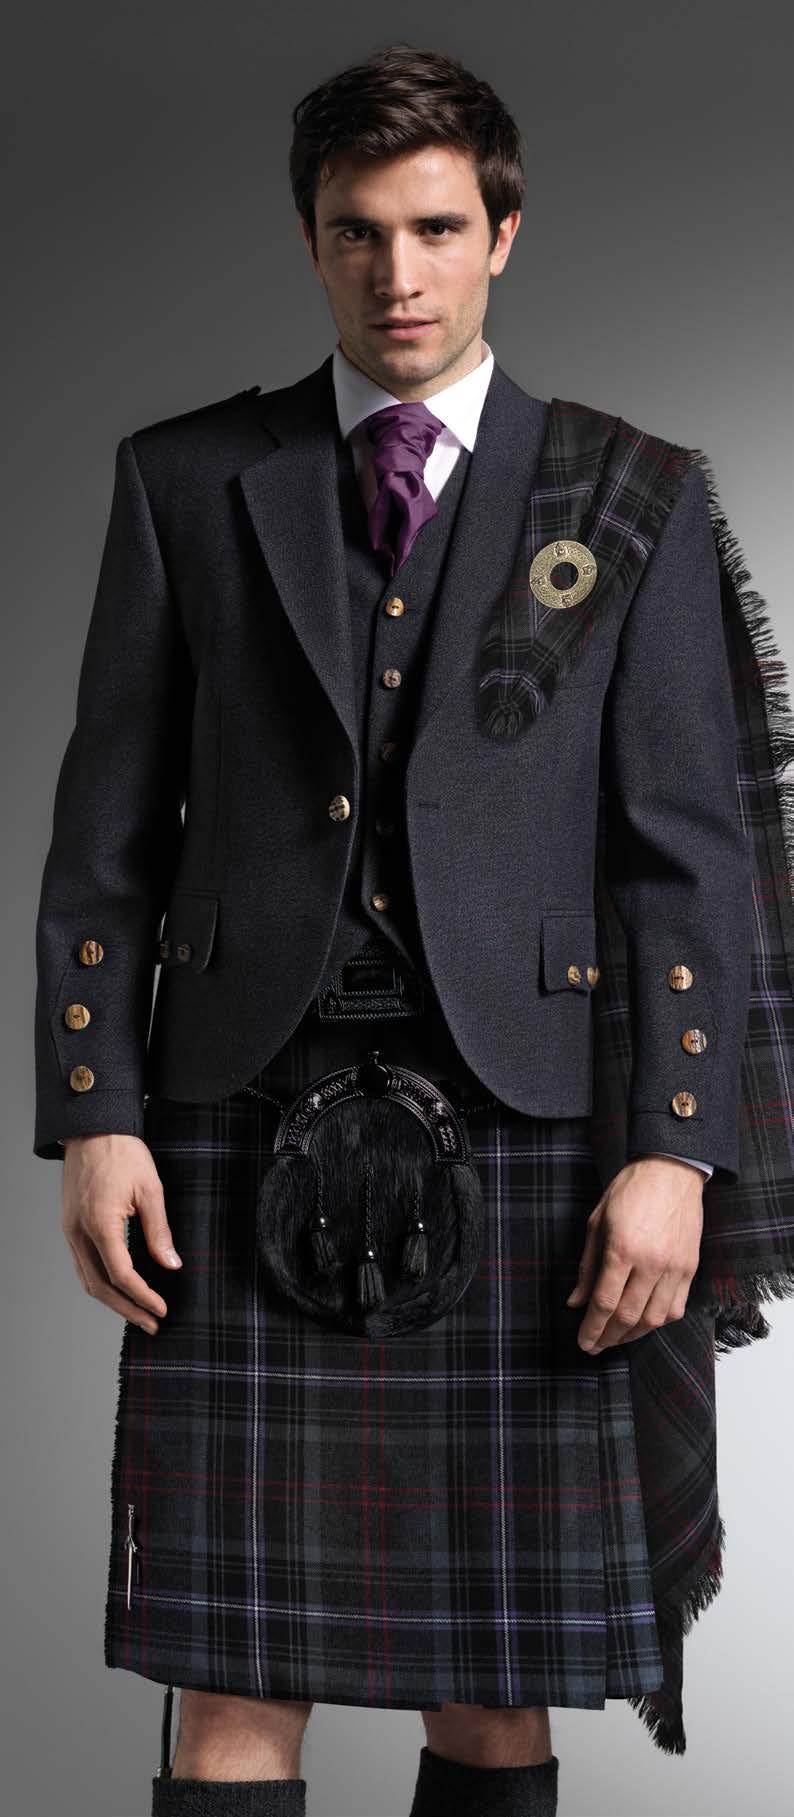 Modern Tweed jackets gives an added edge to the classic highland outfit.